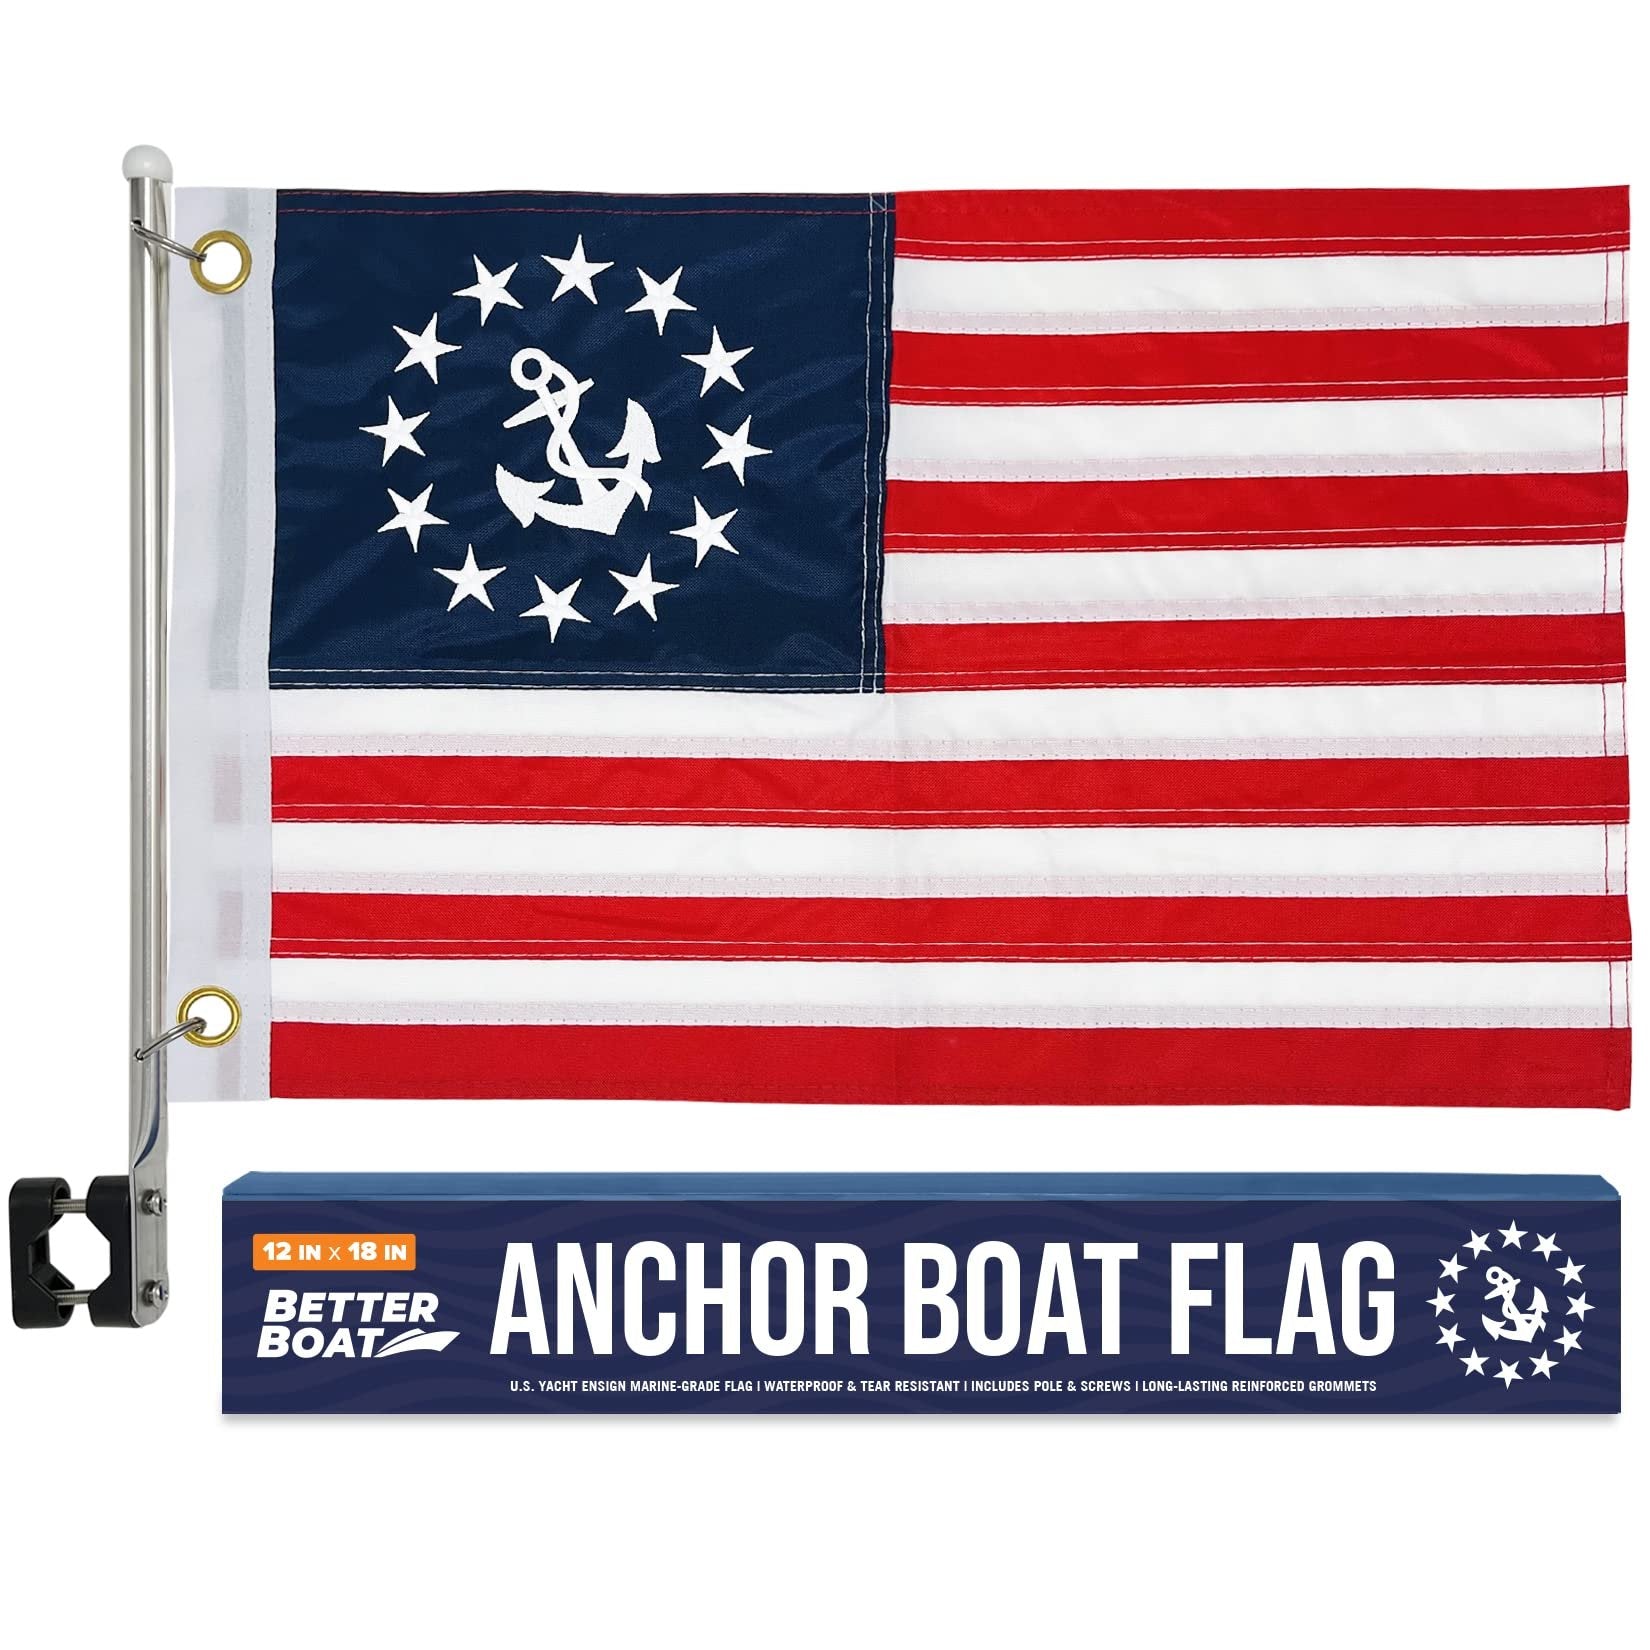 Better Boat Yacht Ensign Flag Pole Kit - 12x18 Double Sided Marine Grade Holder for Small American Flags - Pontoon, Sailboat, Ski Rail Mount